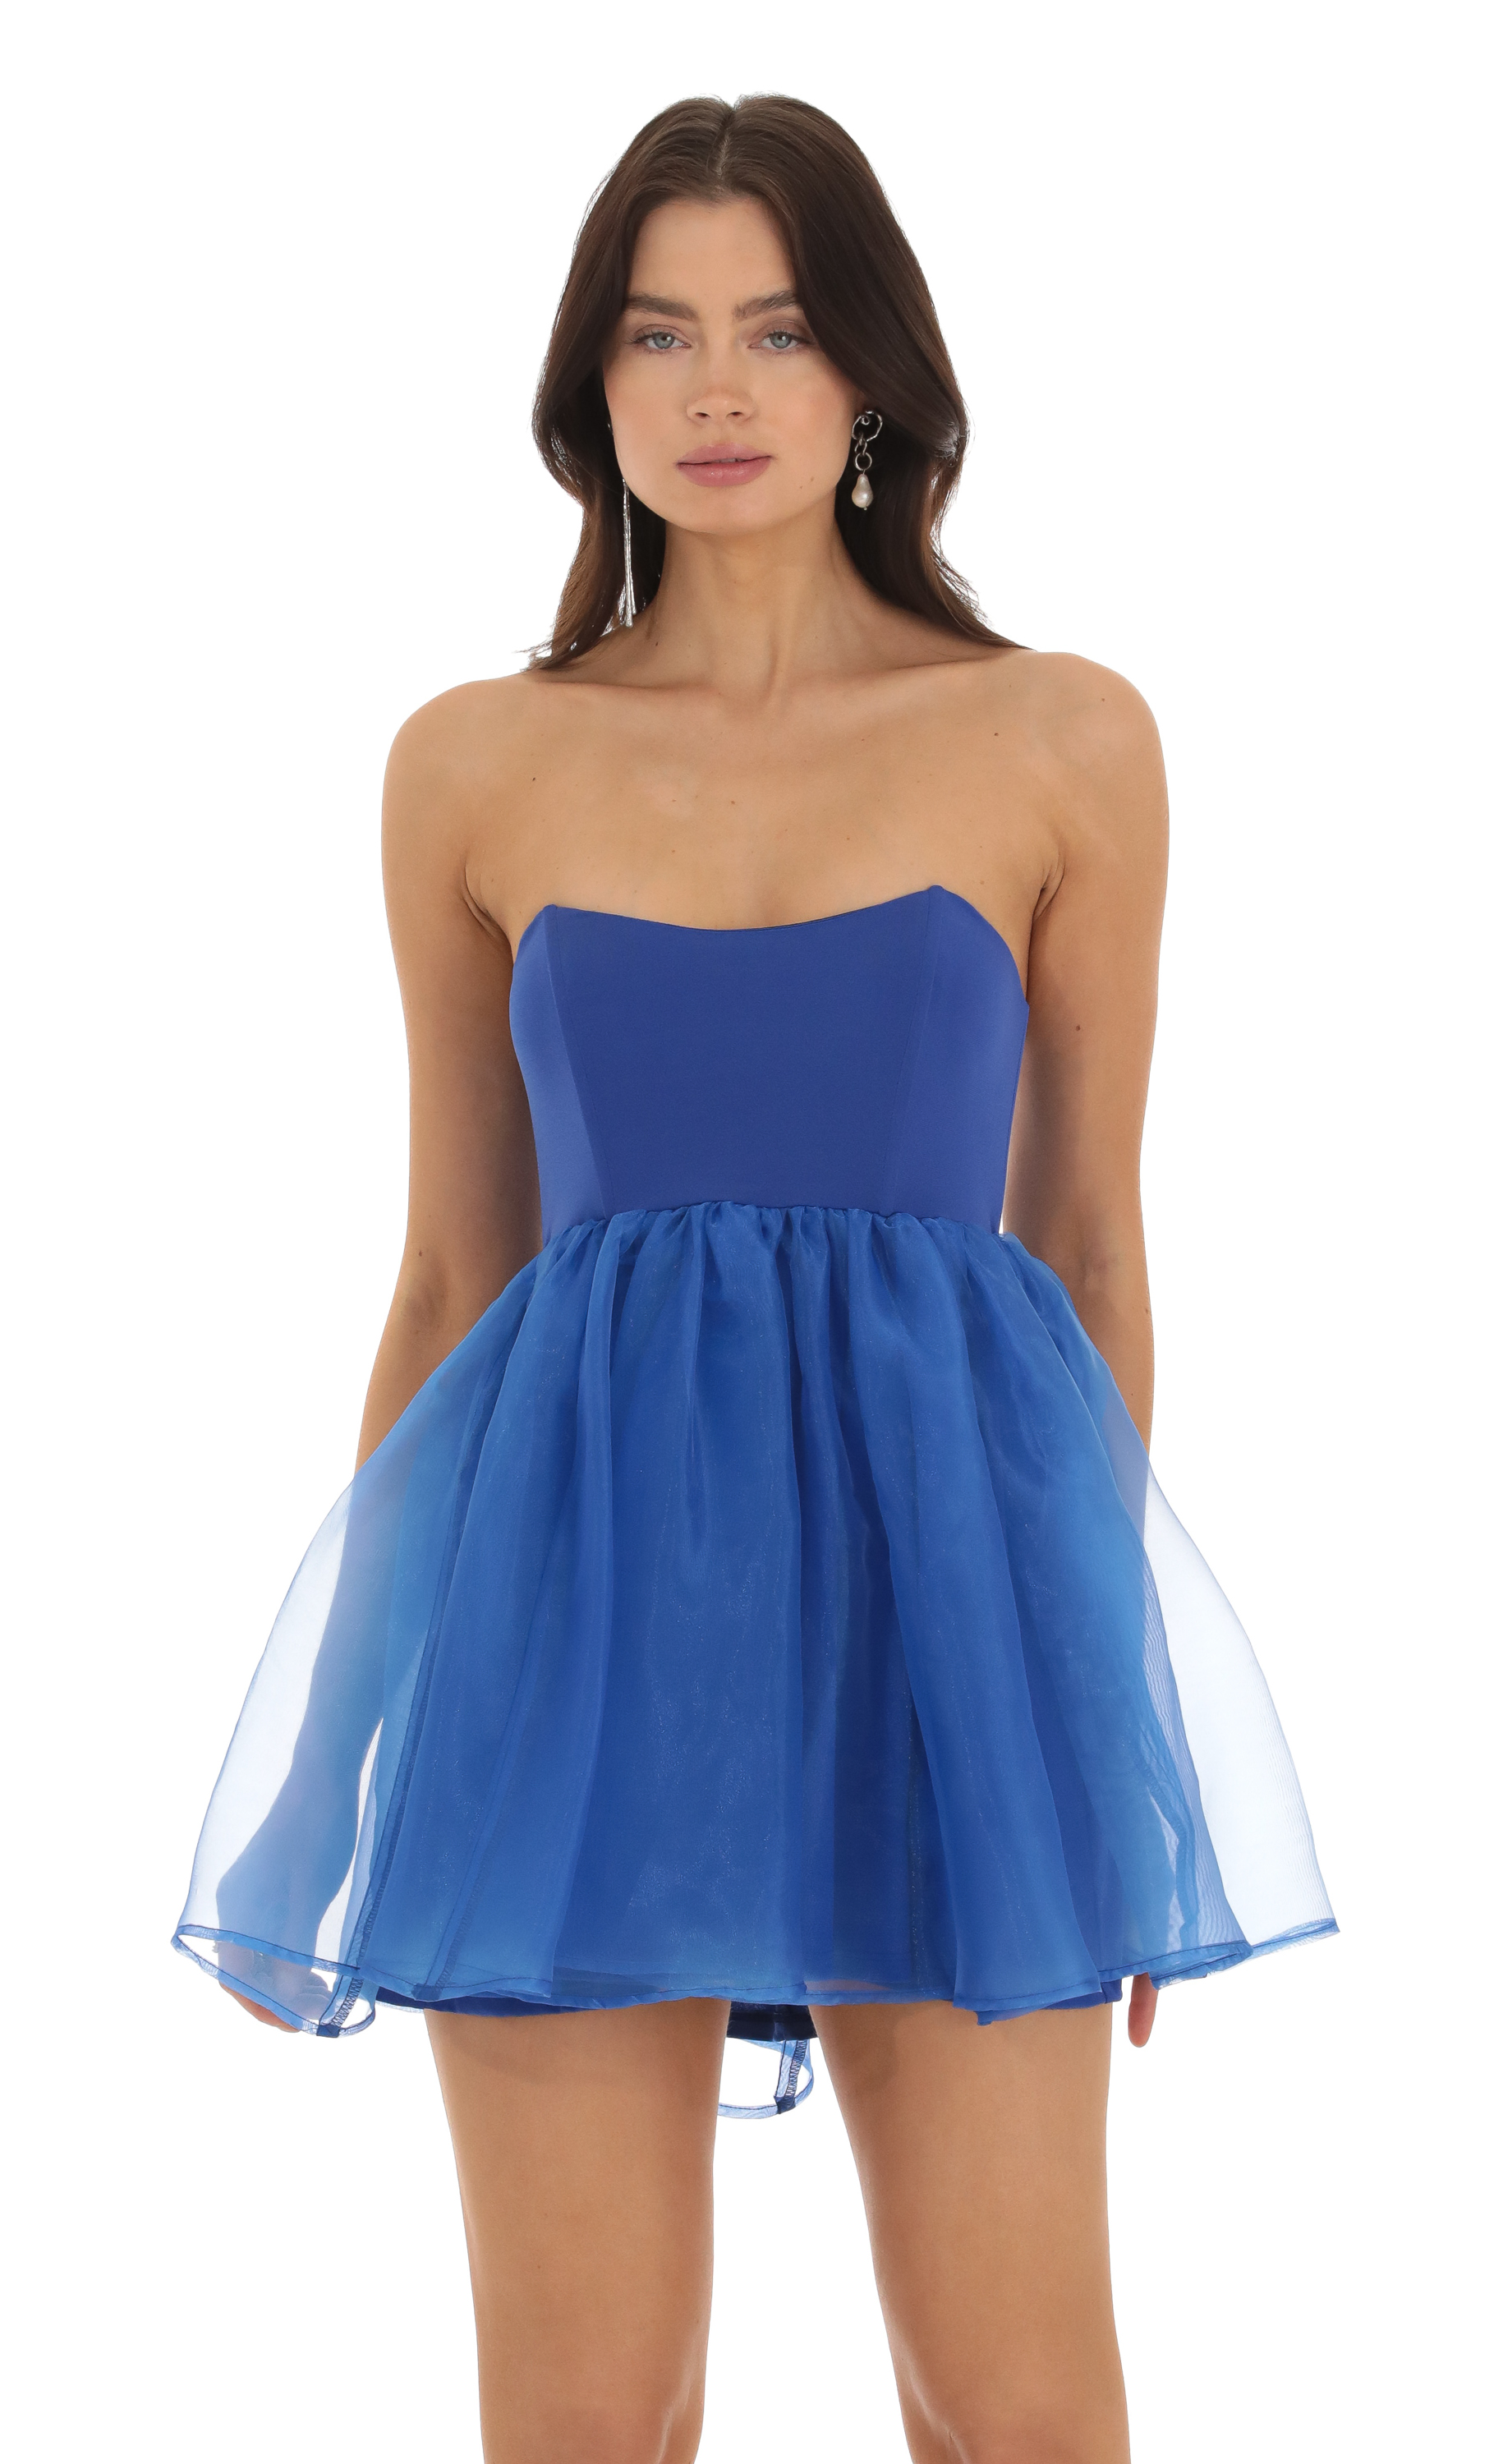 Corset Baby Doll Dress in Blue